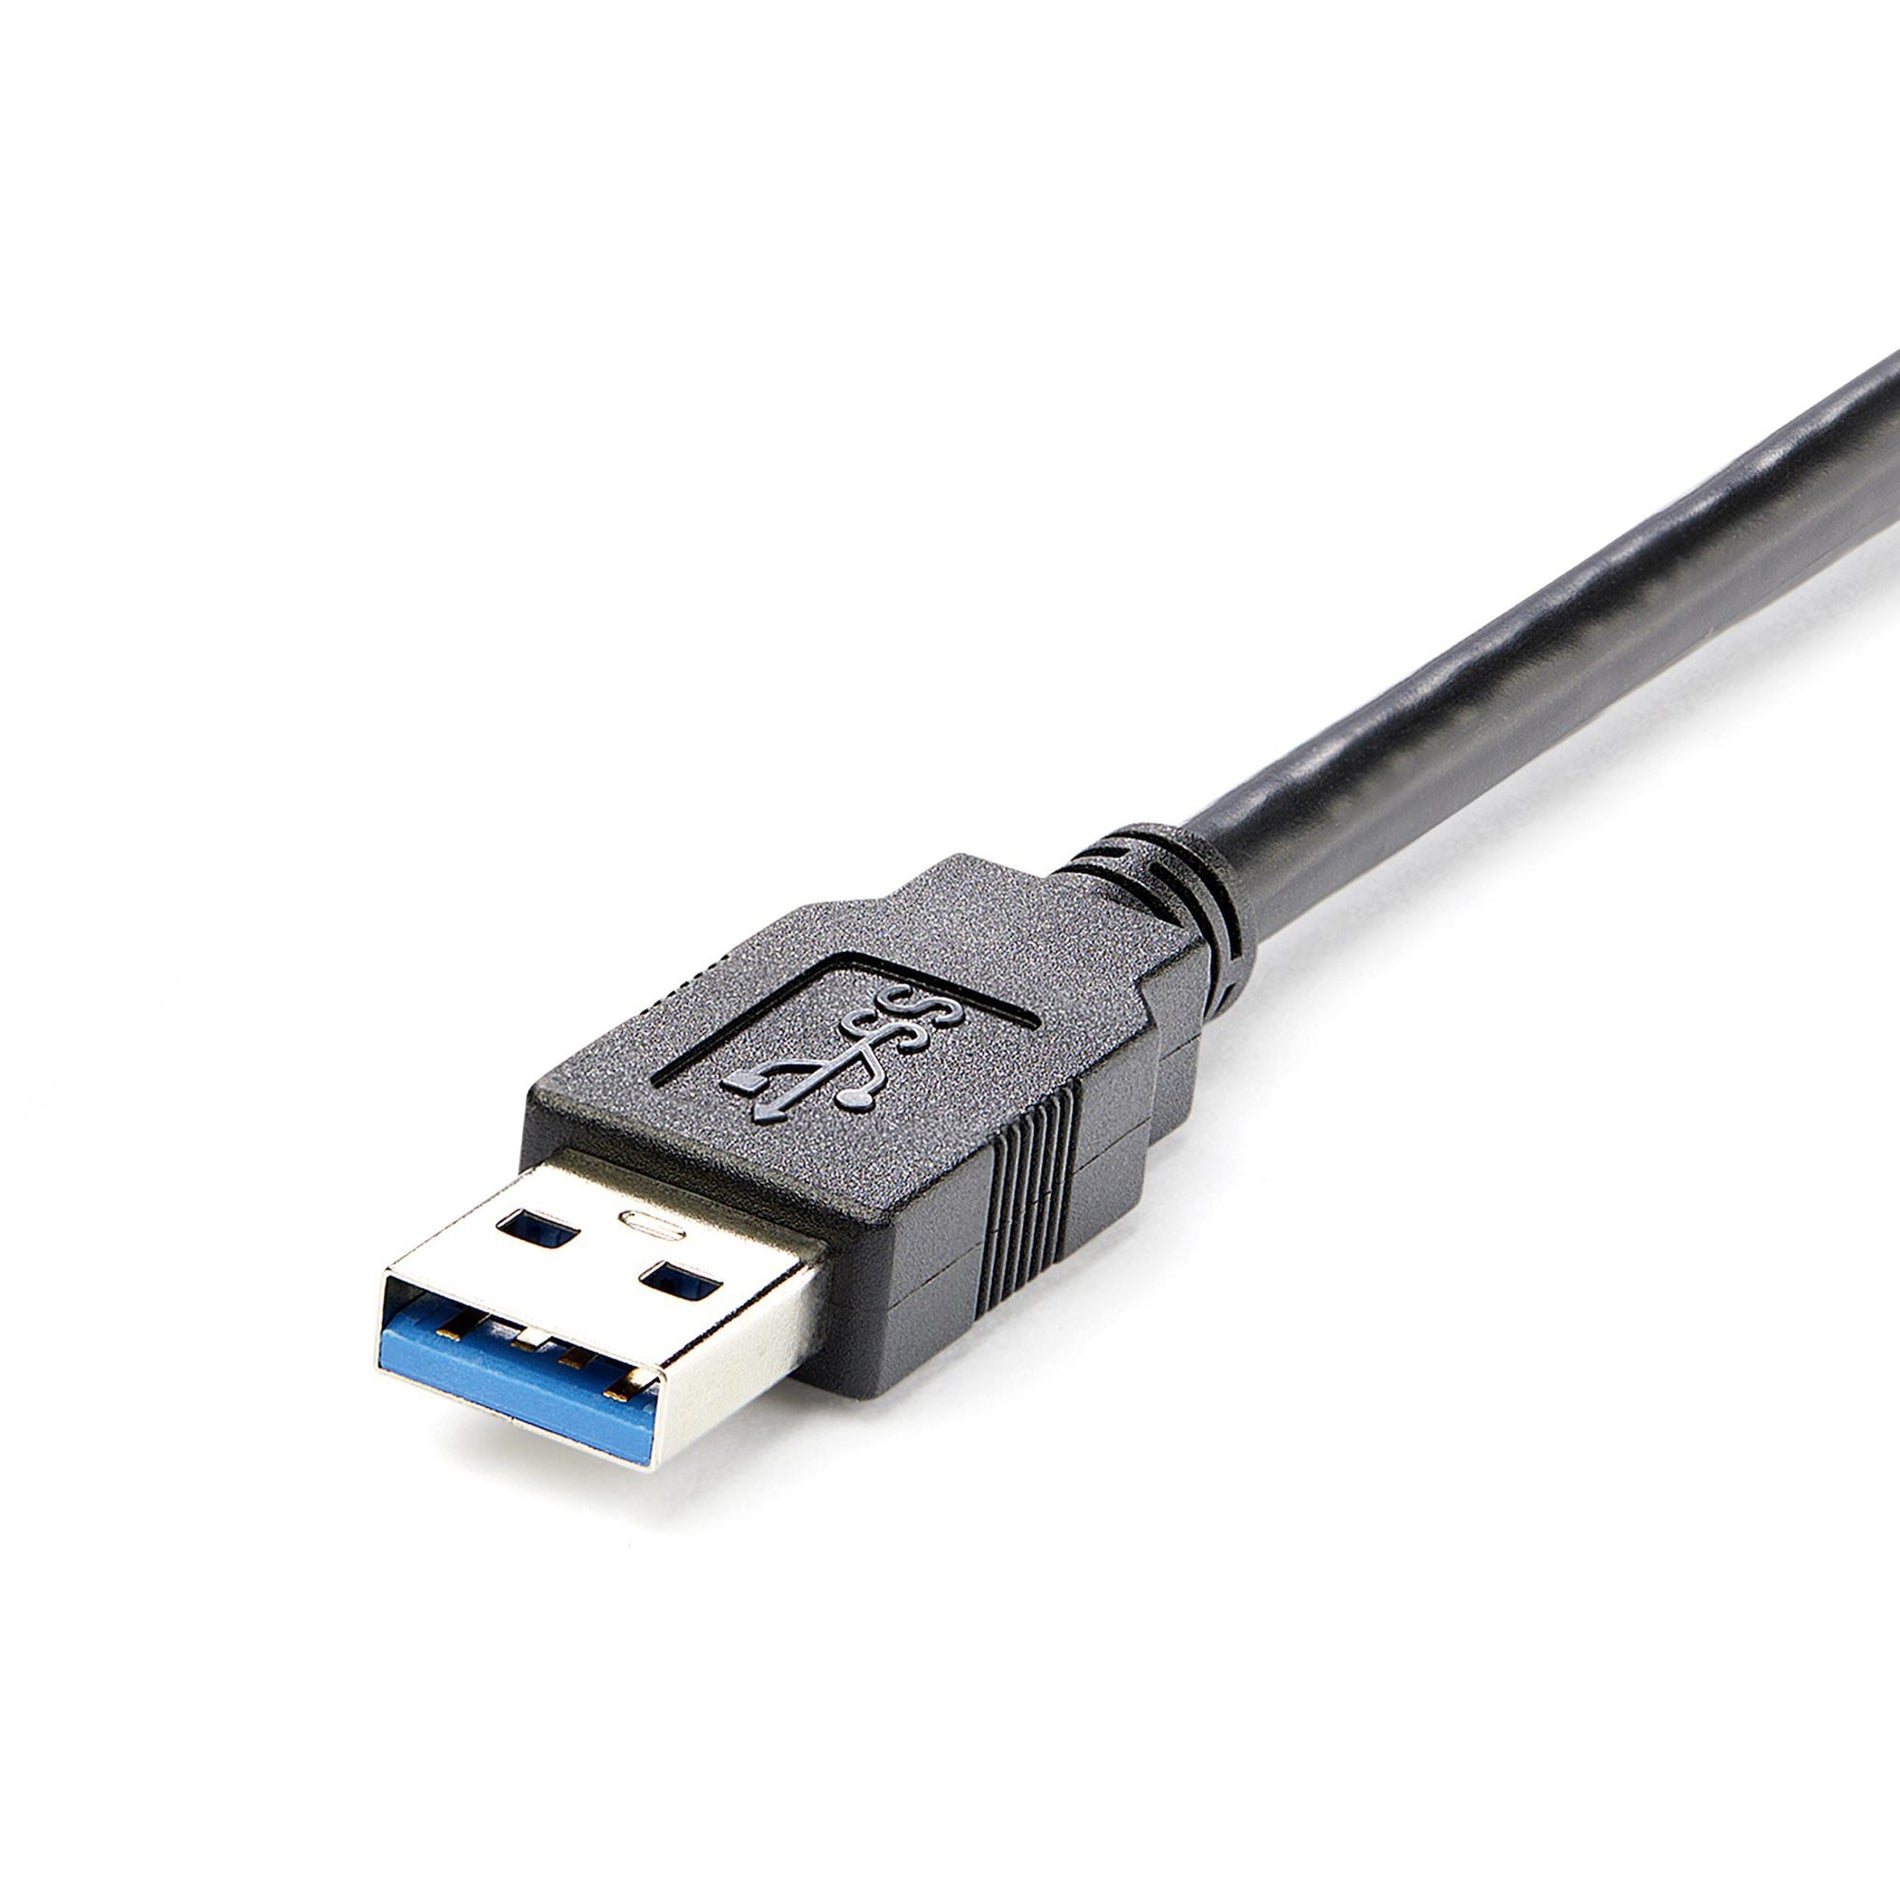 StarTech.com USB3SEXT5DKB 5 ft Black Desktop SuperSpeed USB 3.0 Extension Cable, A to A M/F, EMI Protection, 5 Gbit/s Data Transfer Rate